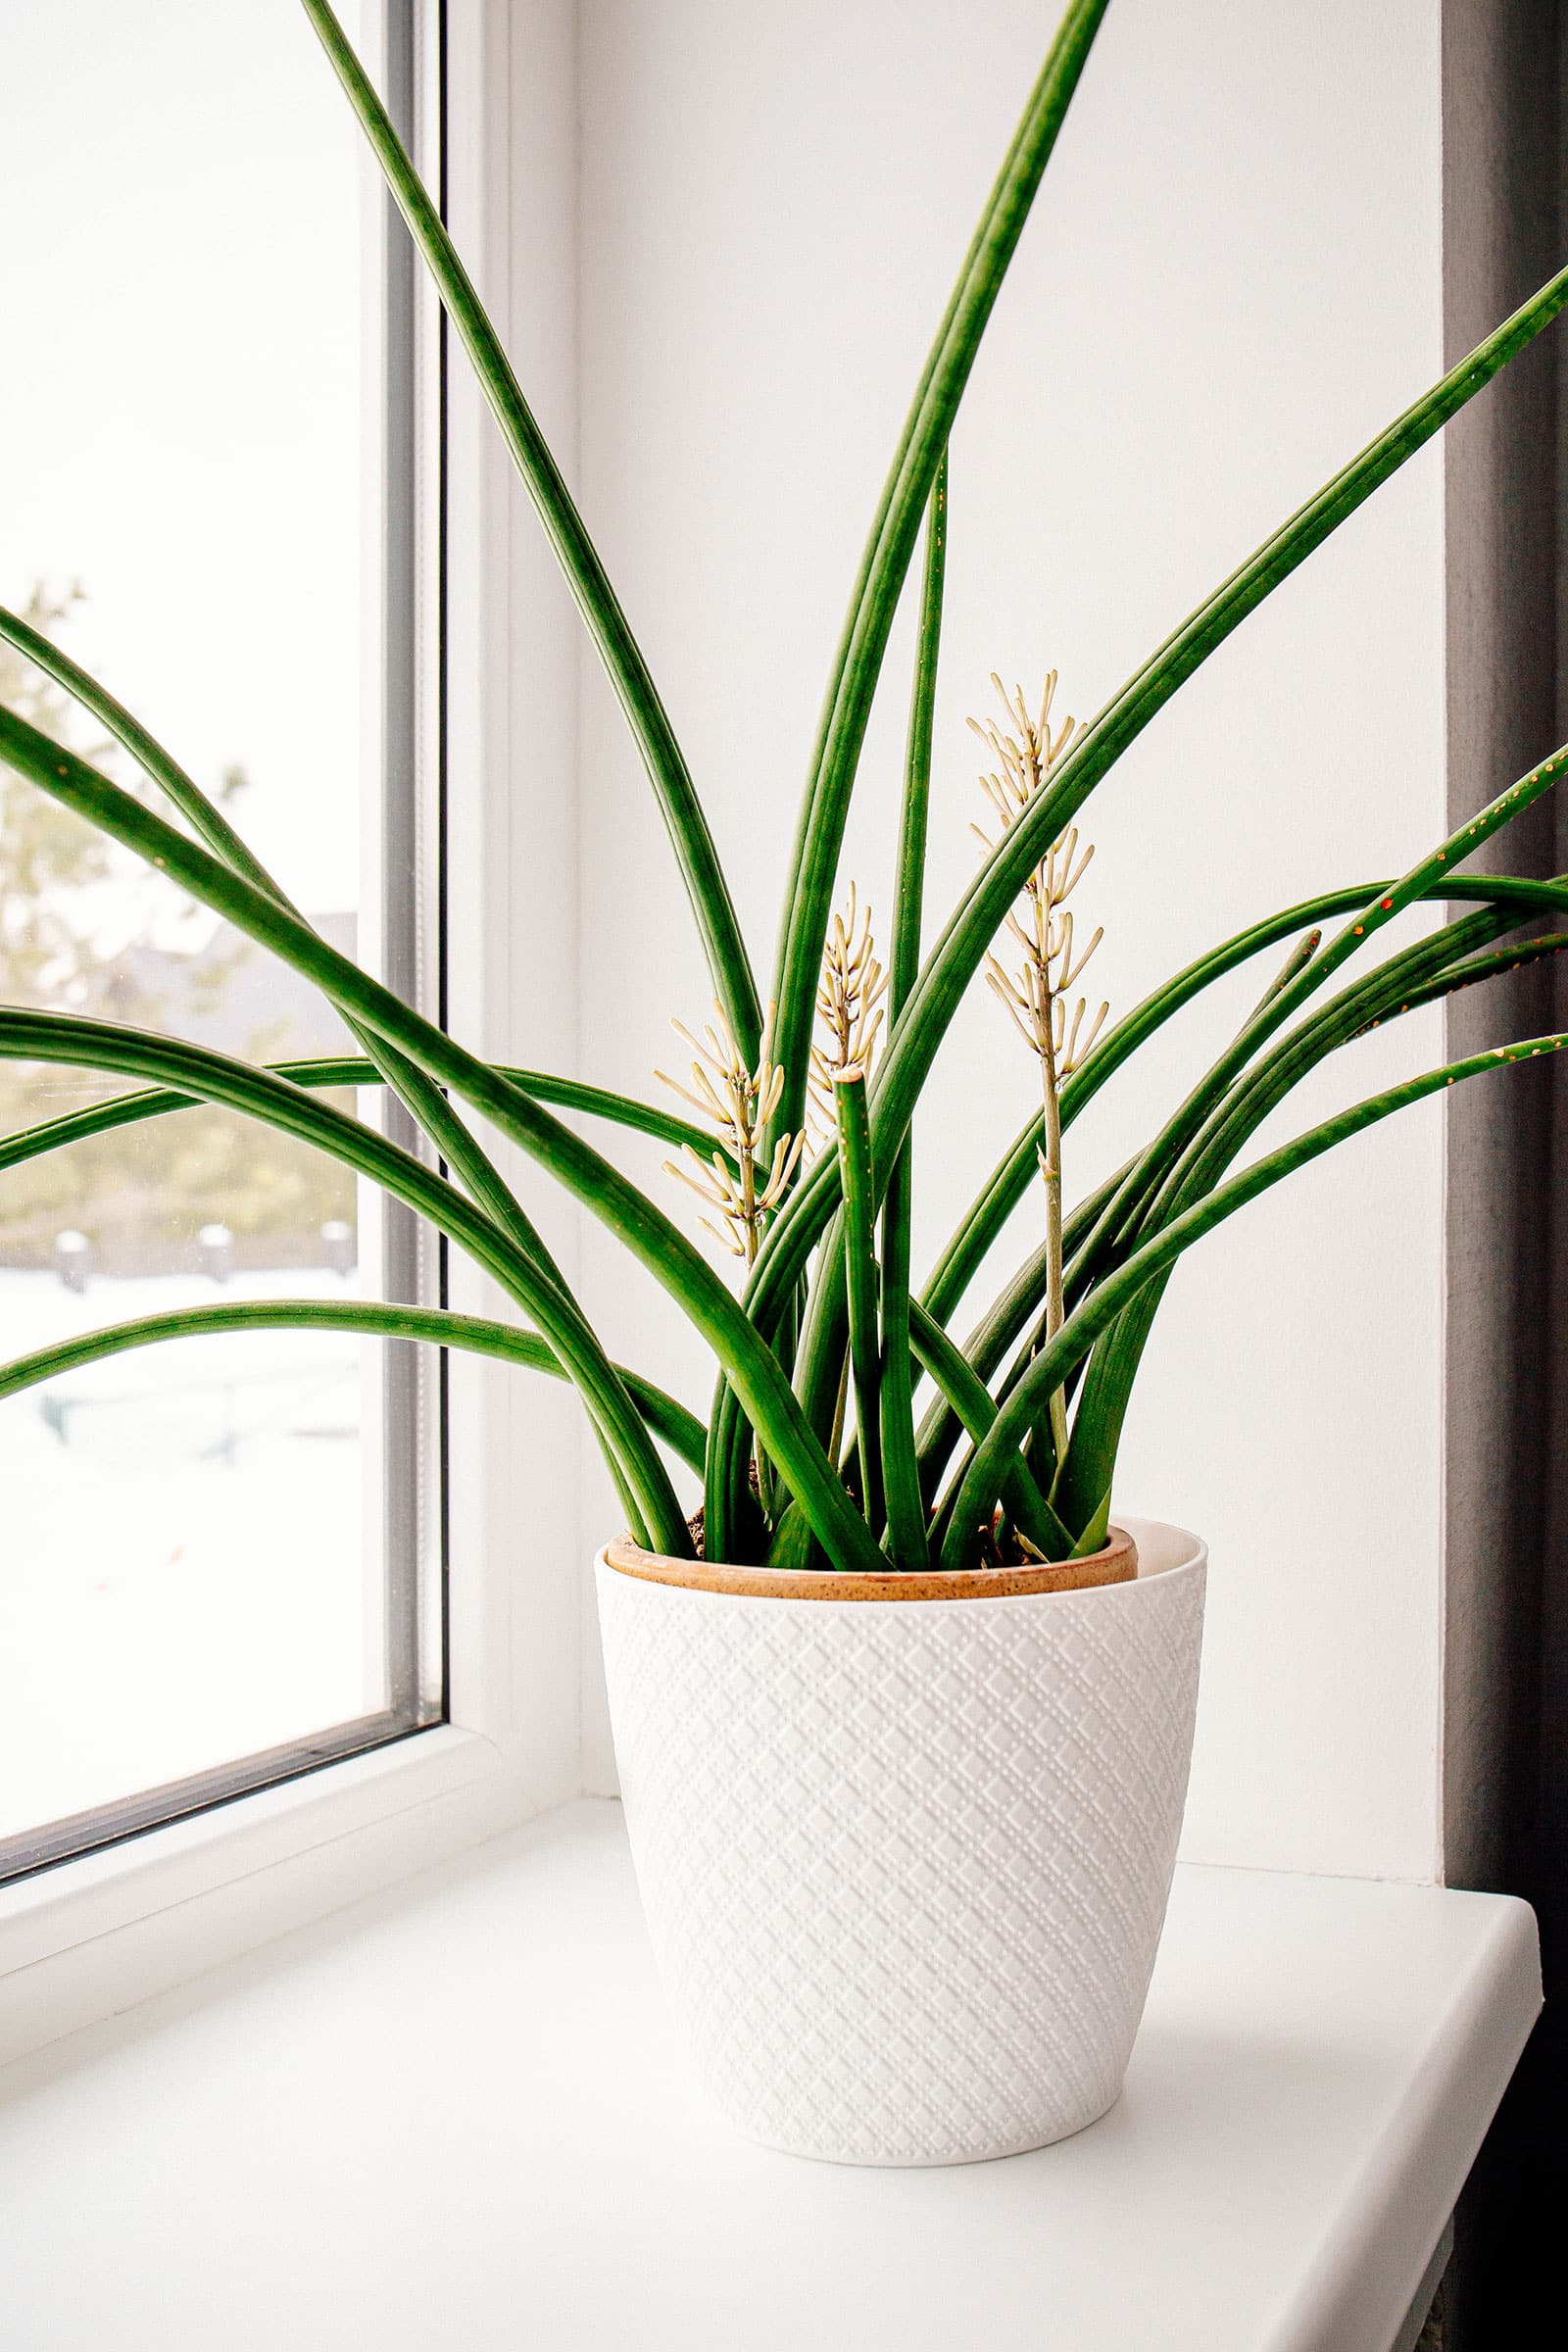 The ins and outs of growing Sansevieria cylindrica